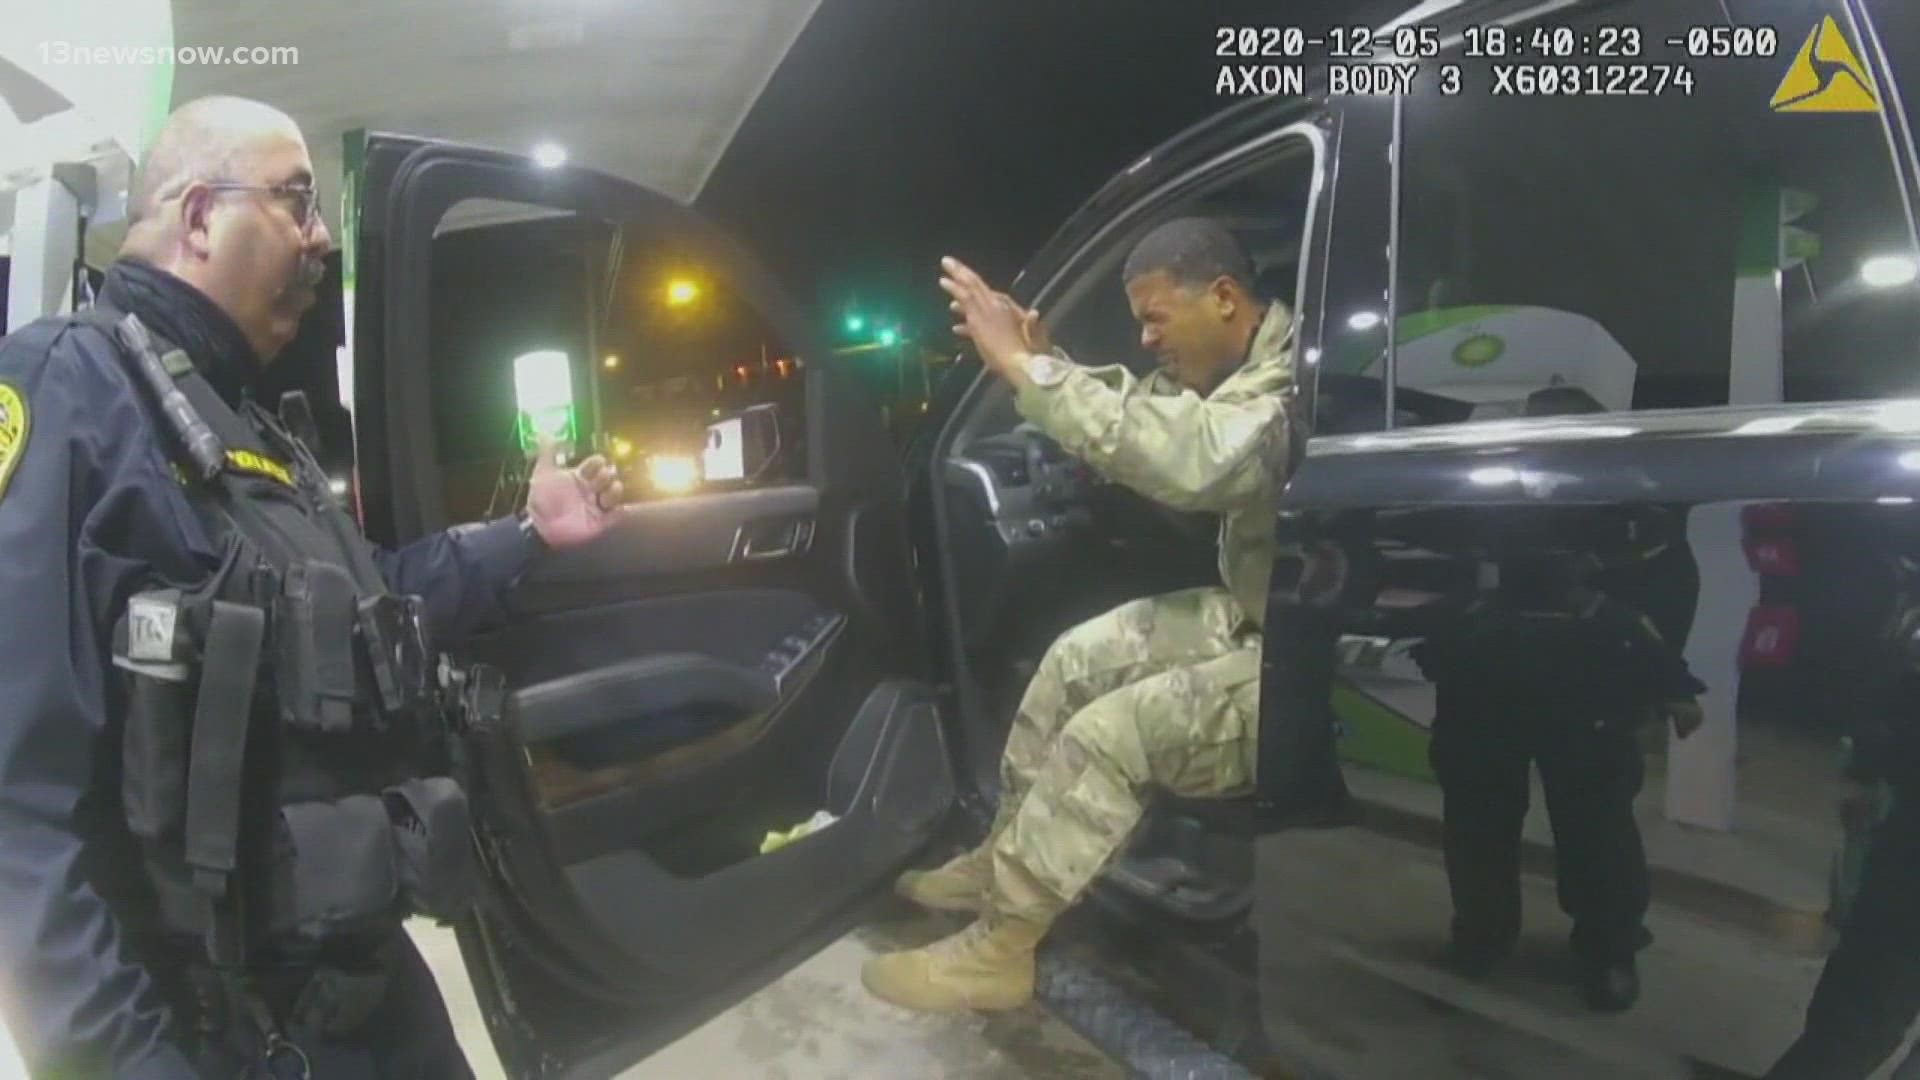 Video of the 2020 traffic stop got millions of views after Caron Nazario filed the federal lawsuit.